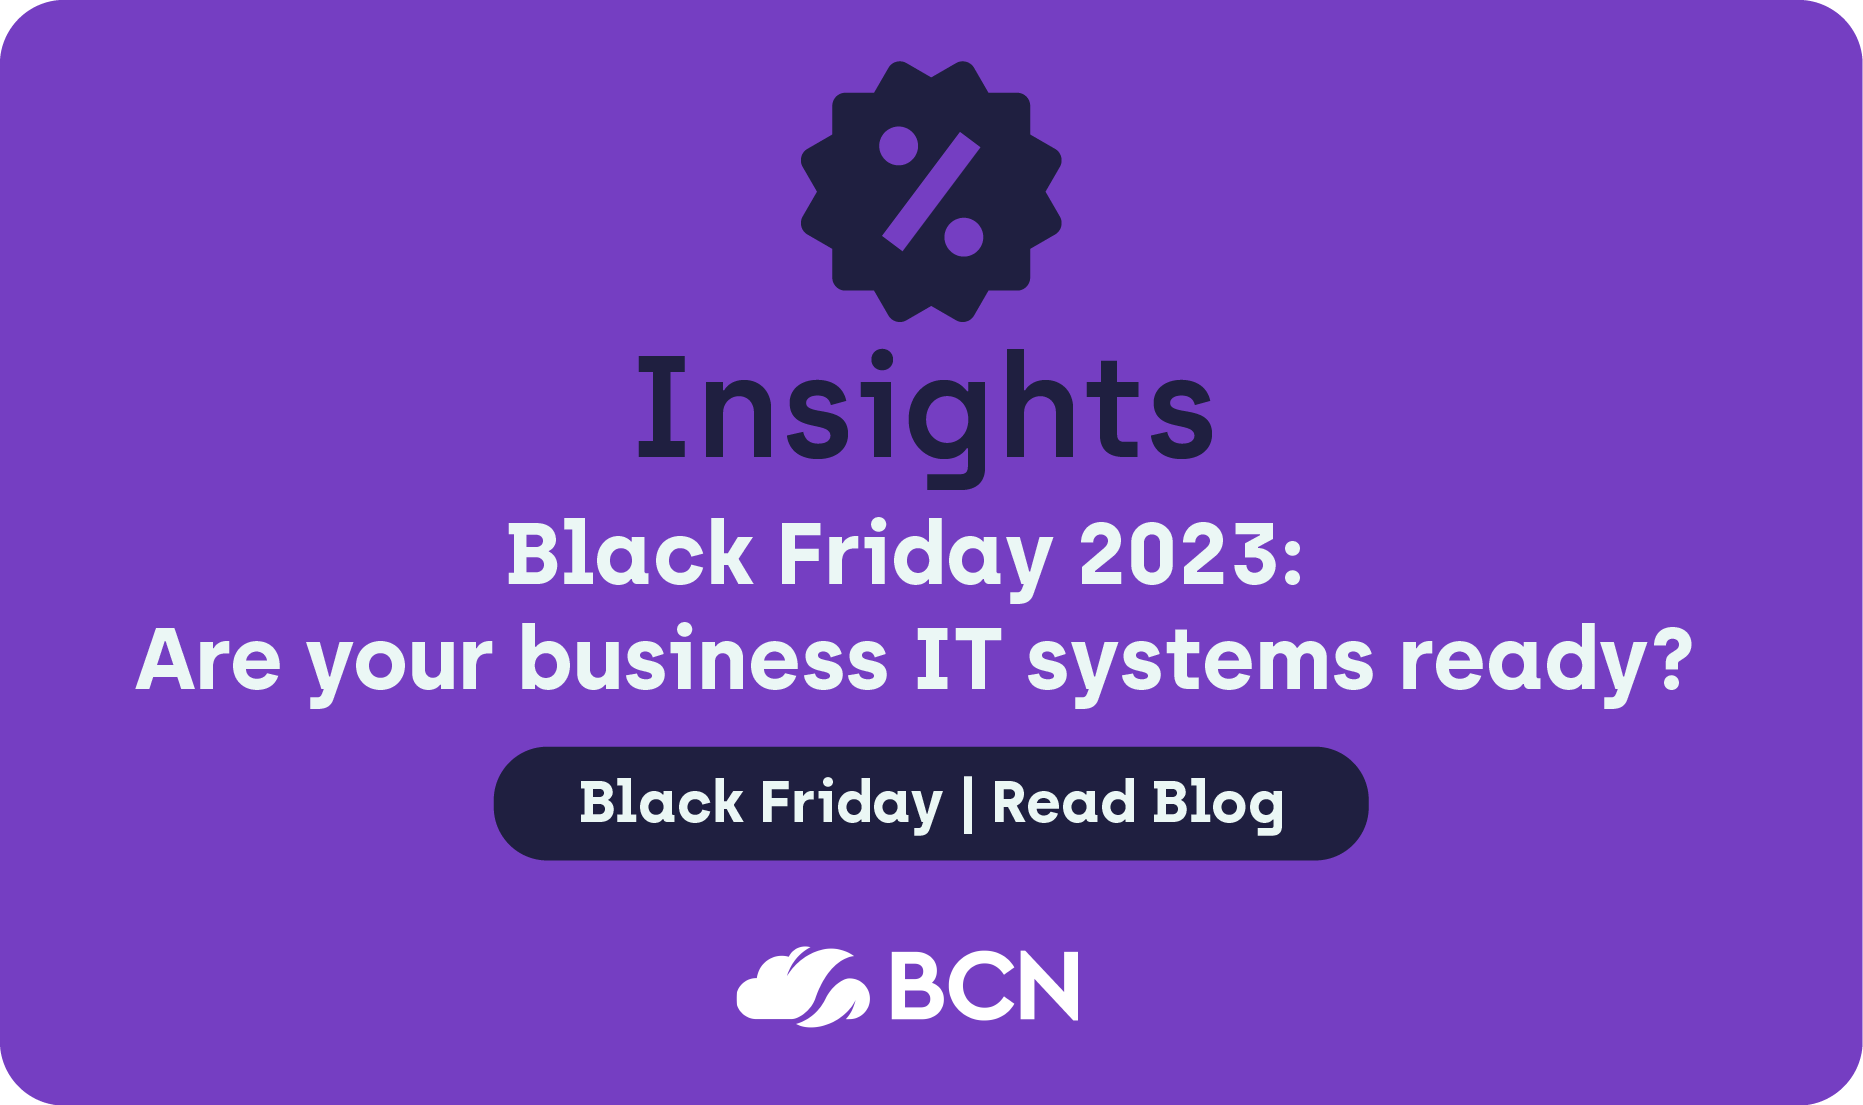 Black Friday 2023: Are your business IT systems ready?